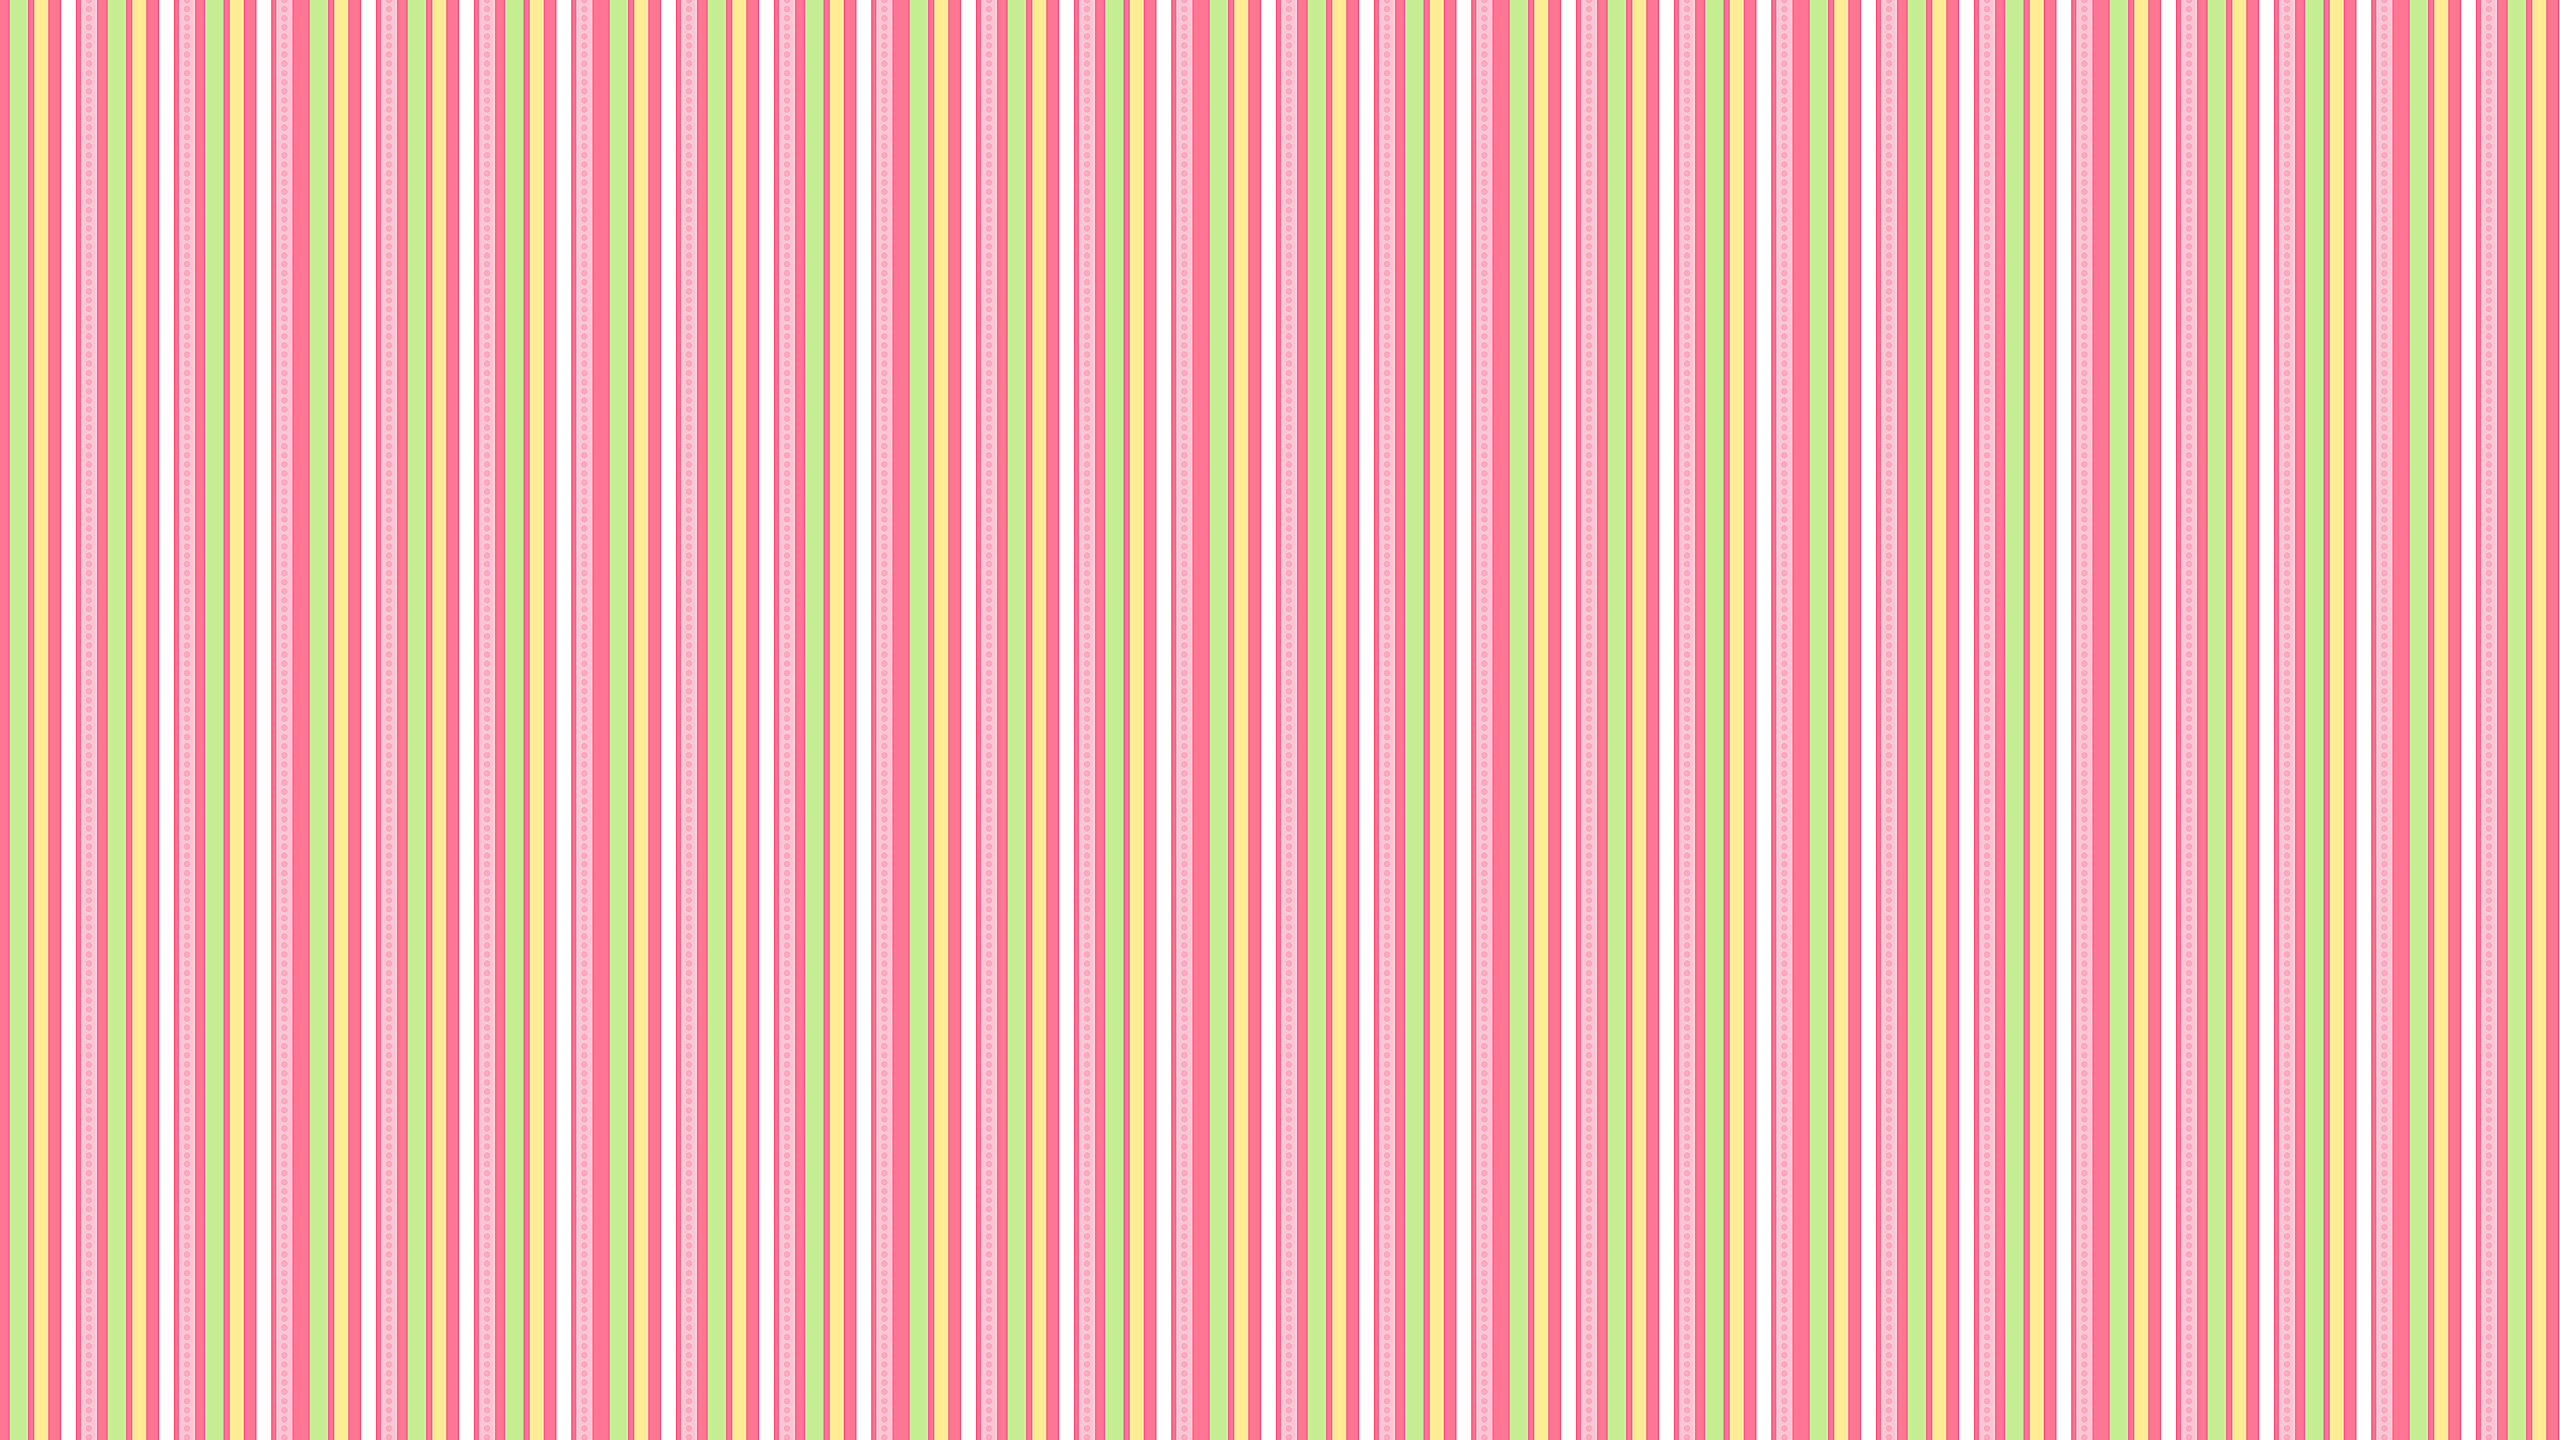 Pink and white striped background with a small pattern - Coral